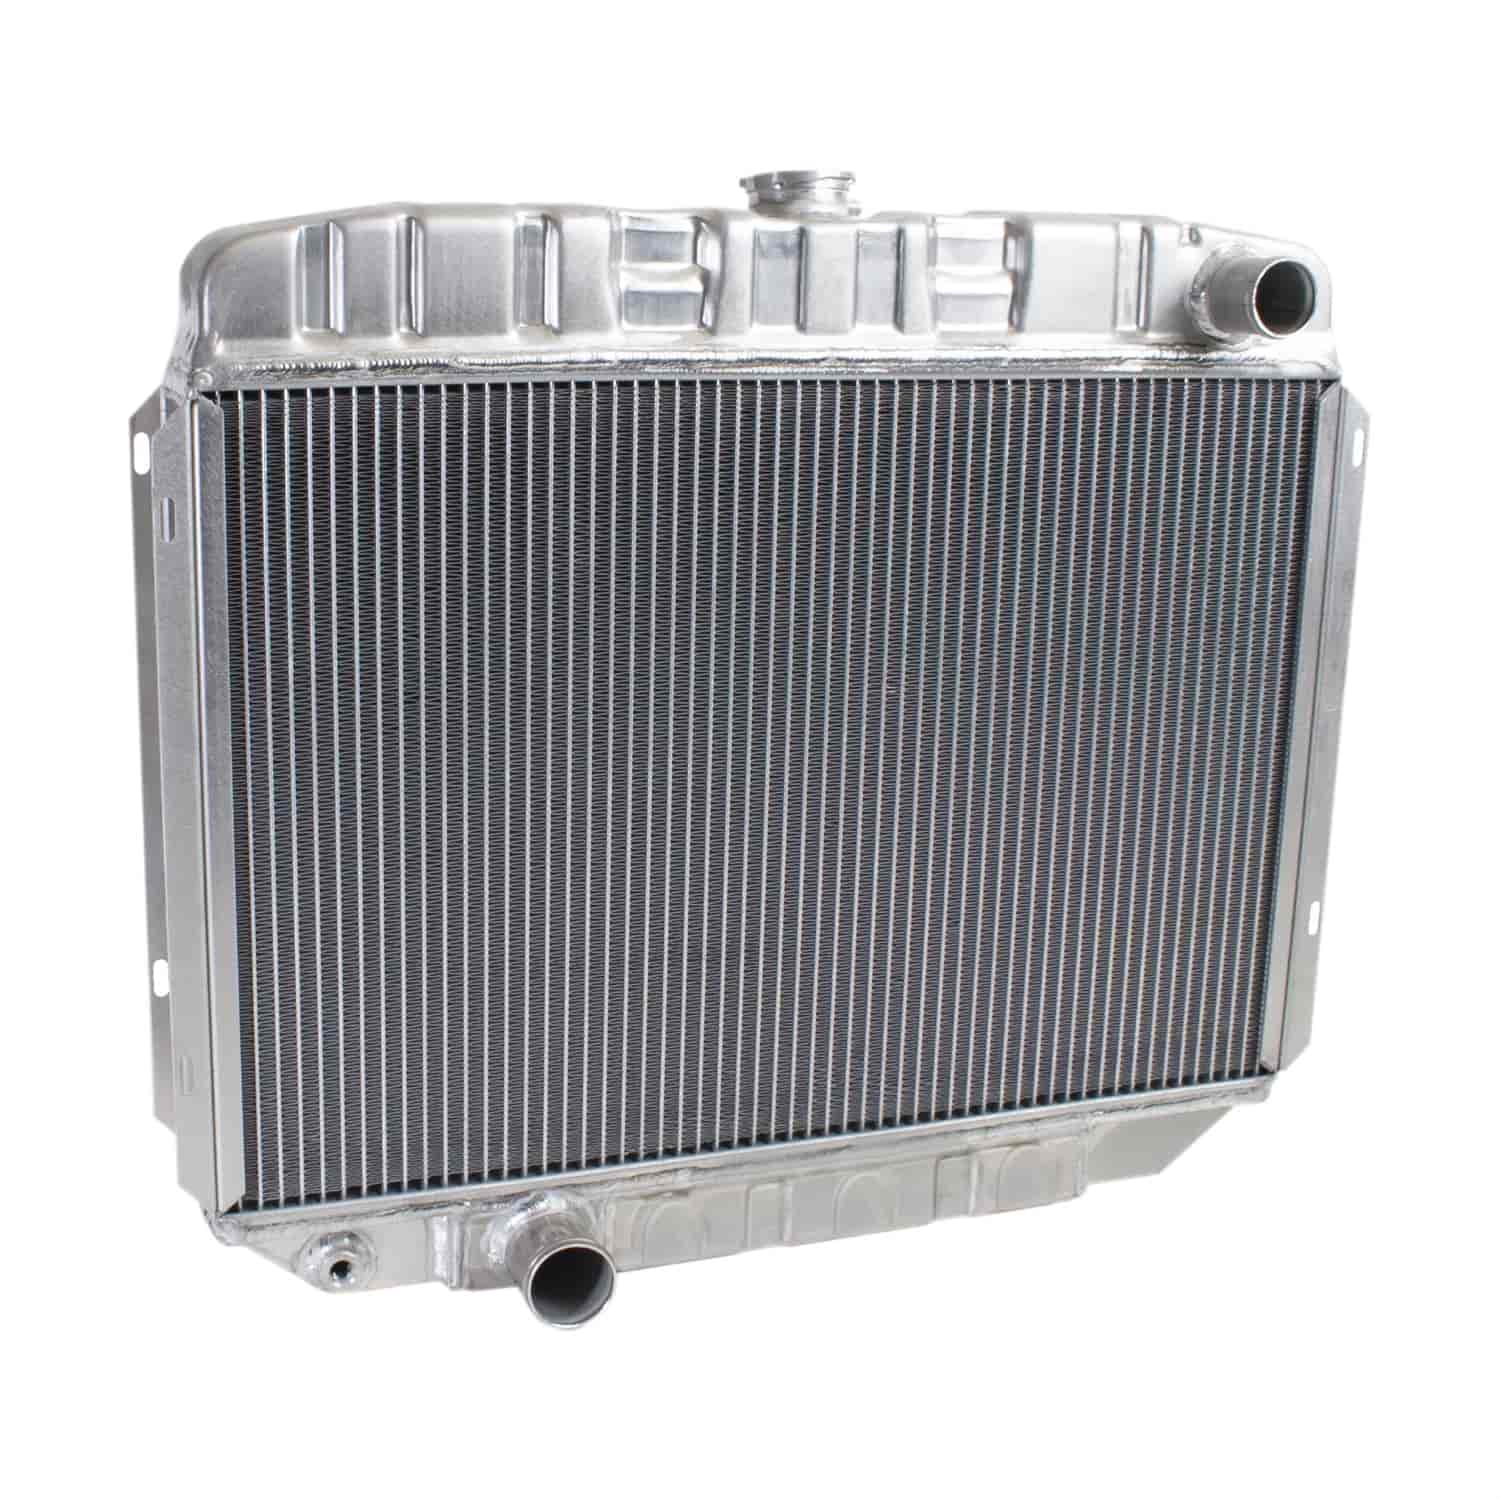 ExactFit Radiator for 1967 Ford Mustang with Big Block & Late Small Block